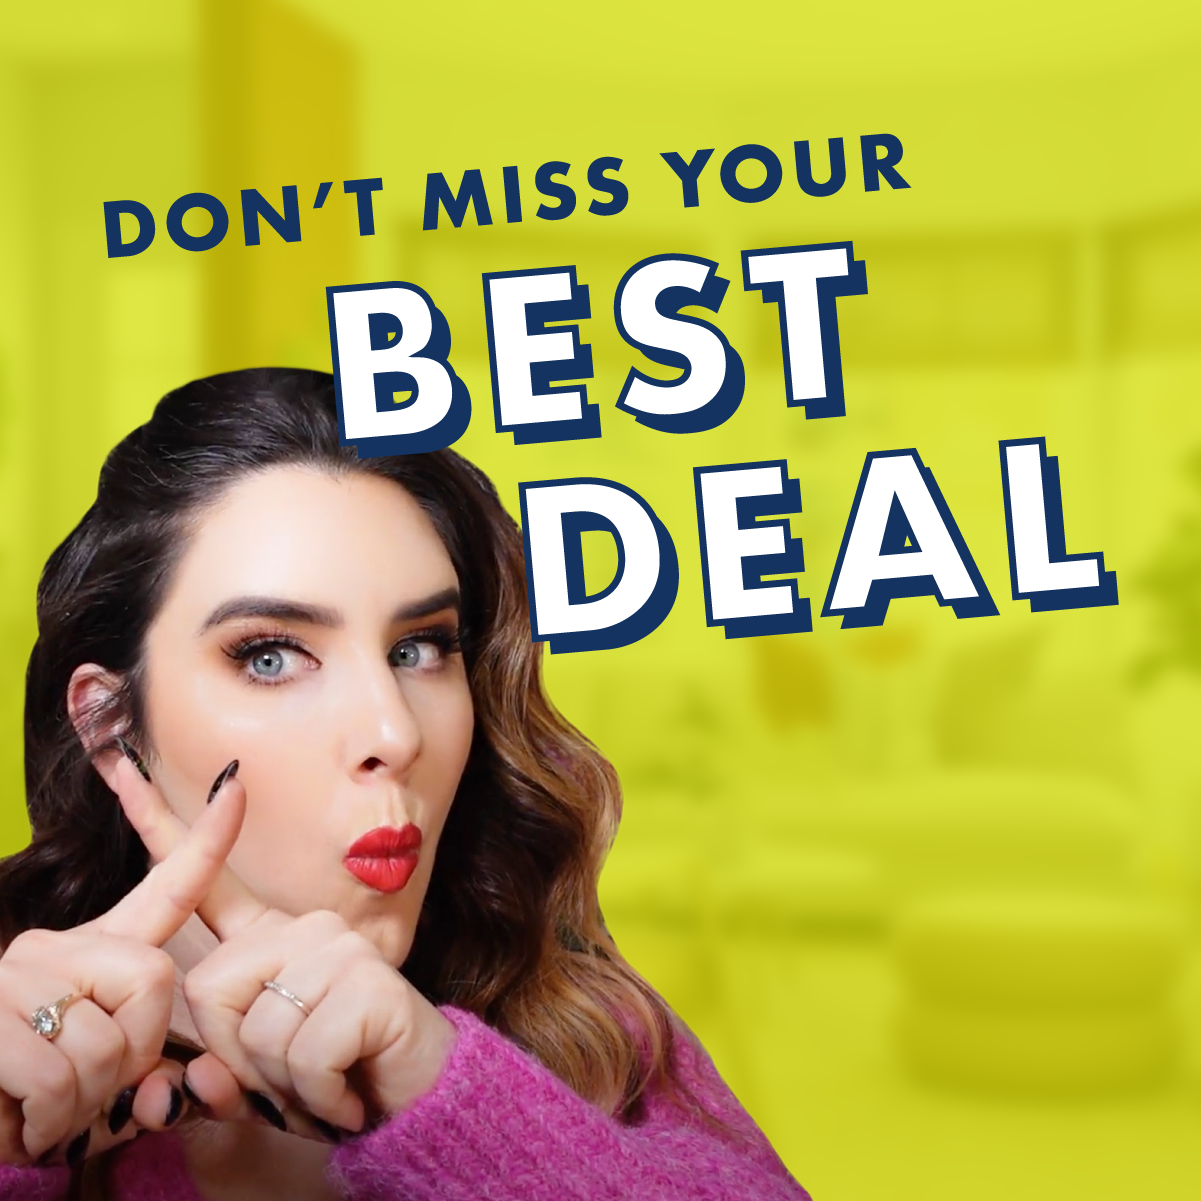 Don't miss your best deal